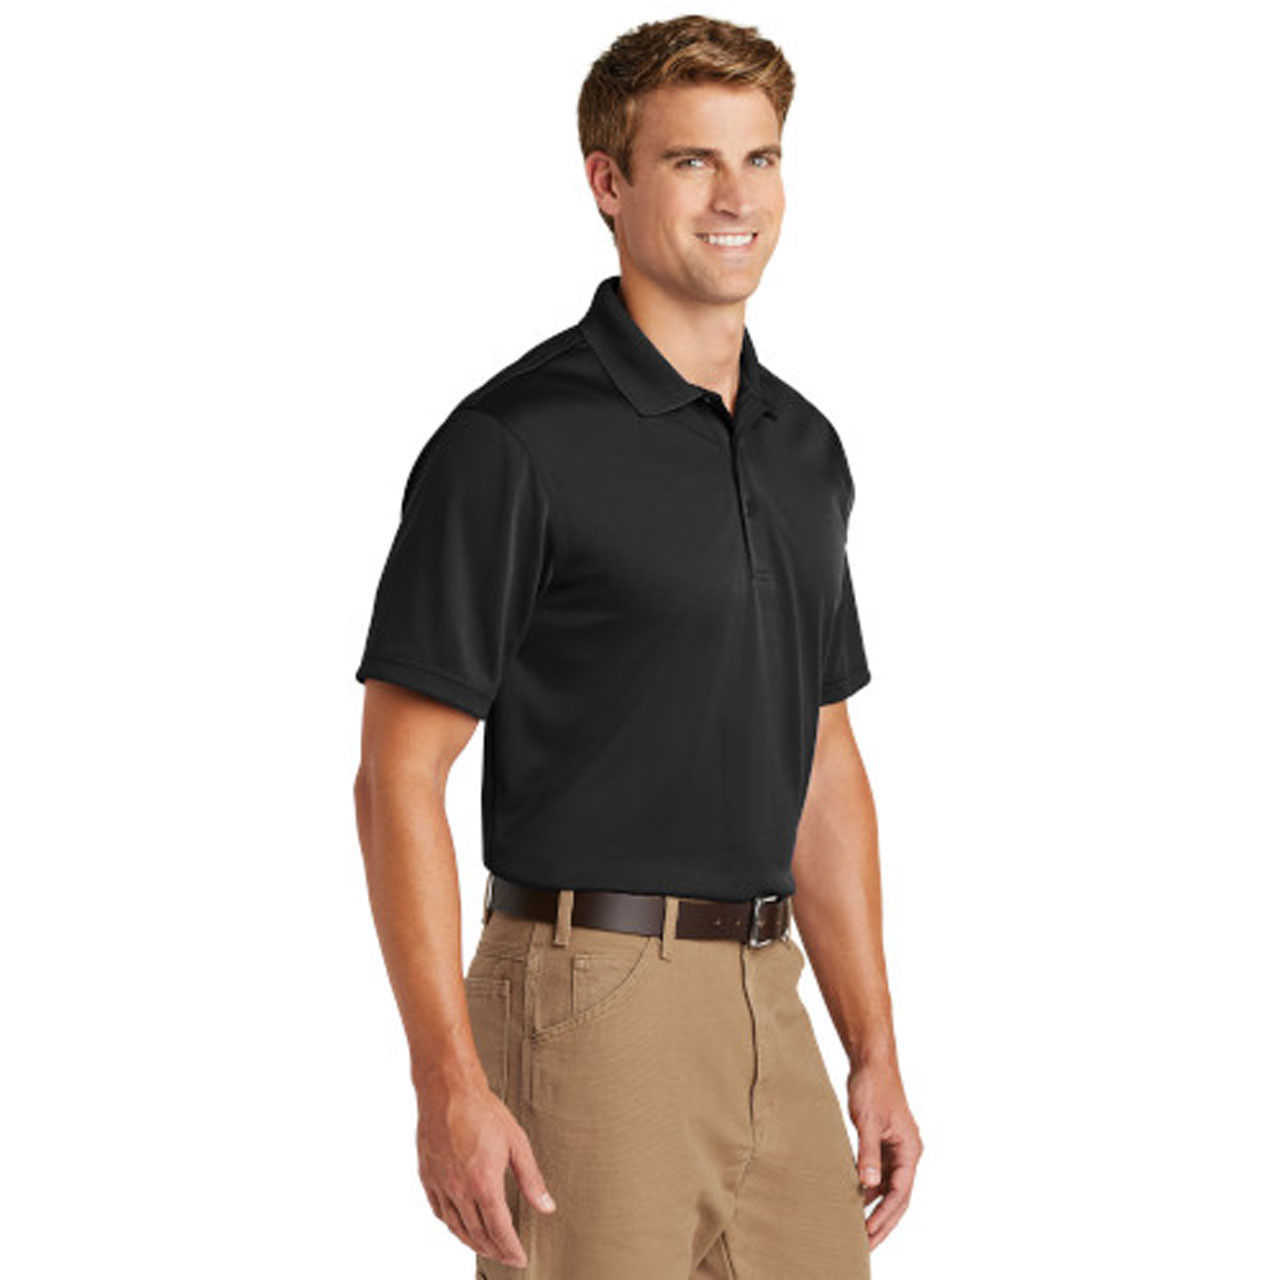 What type of sleeves does the men's black polo shirt have?